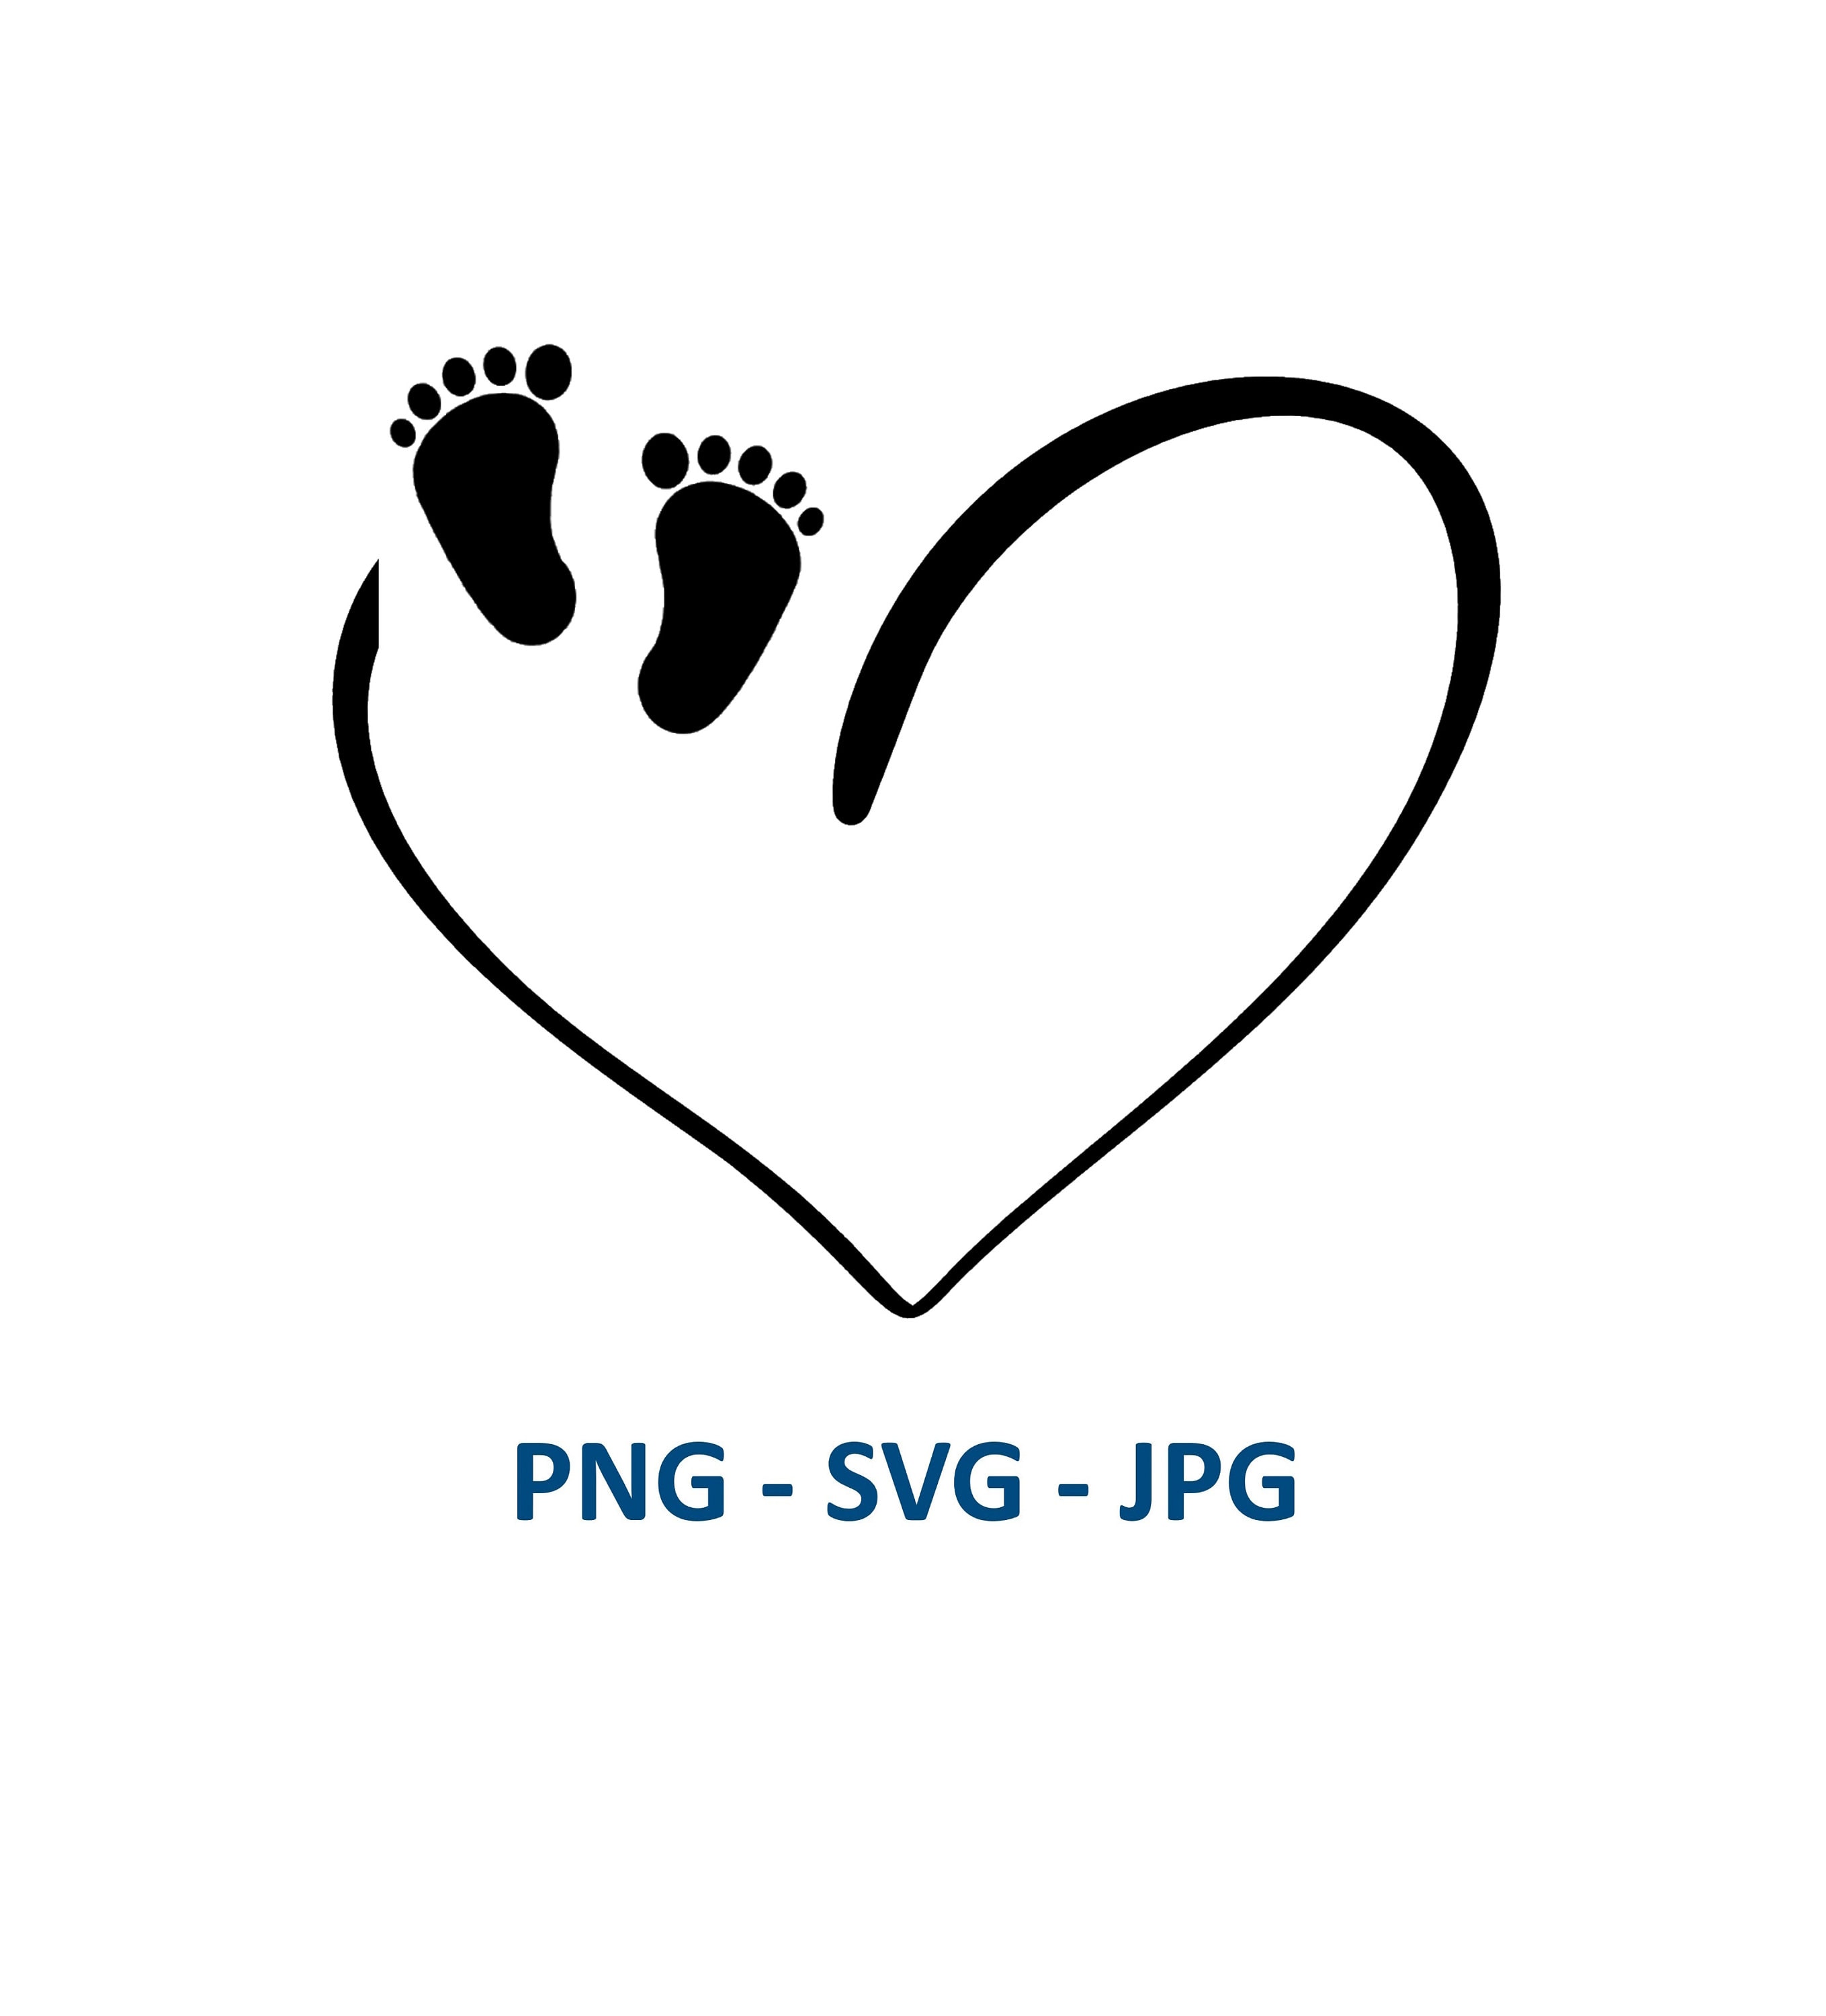 3D Render Baby foot bare foot heart icon Transparent Background PNG Baby  Feet, Footprint, Hearts 13860988 PNG